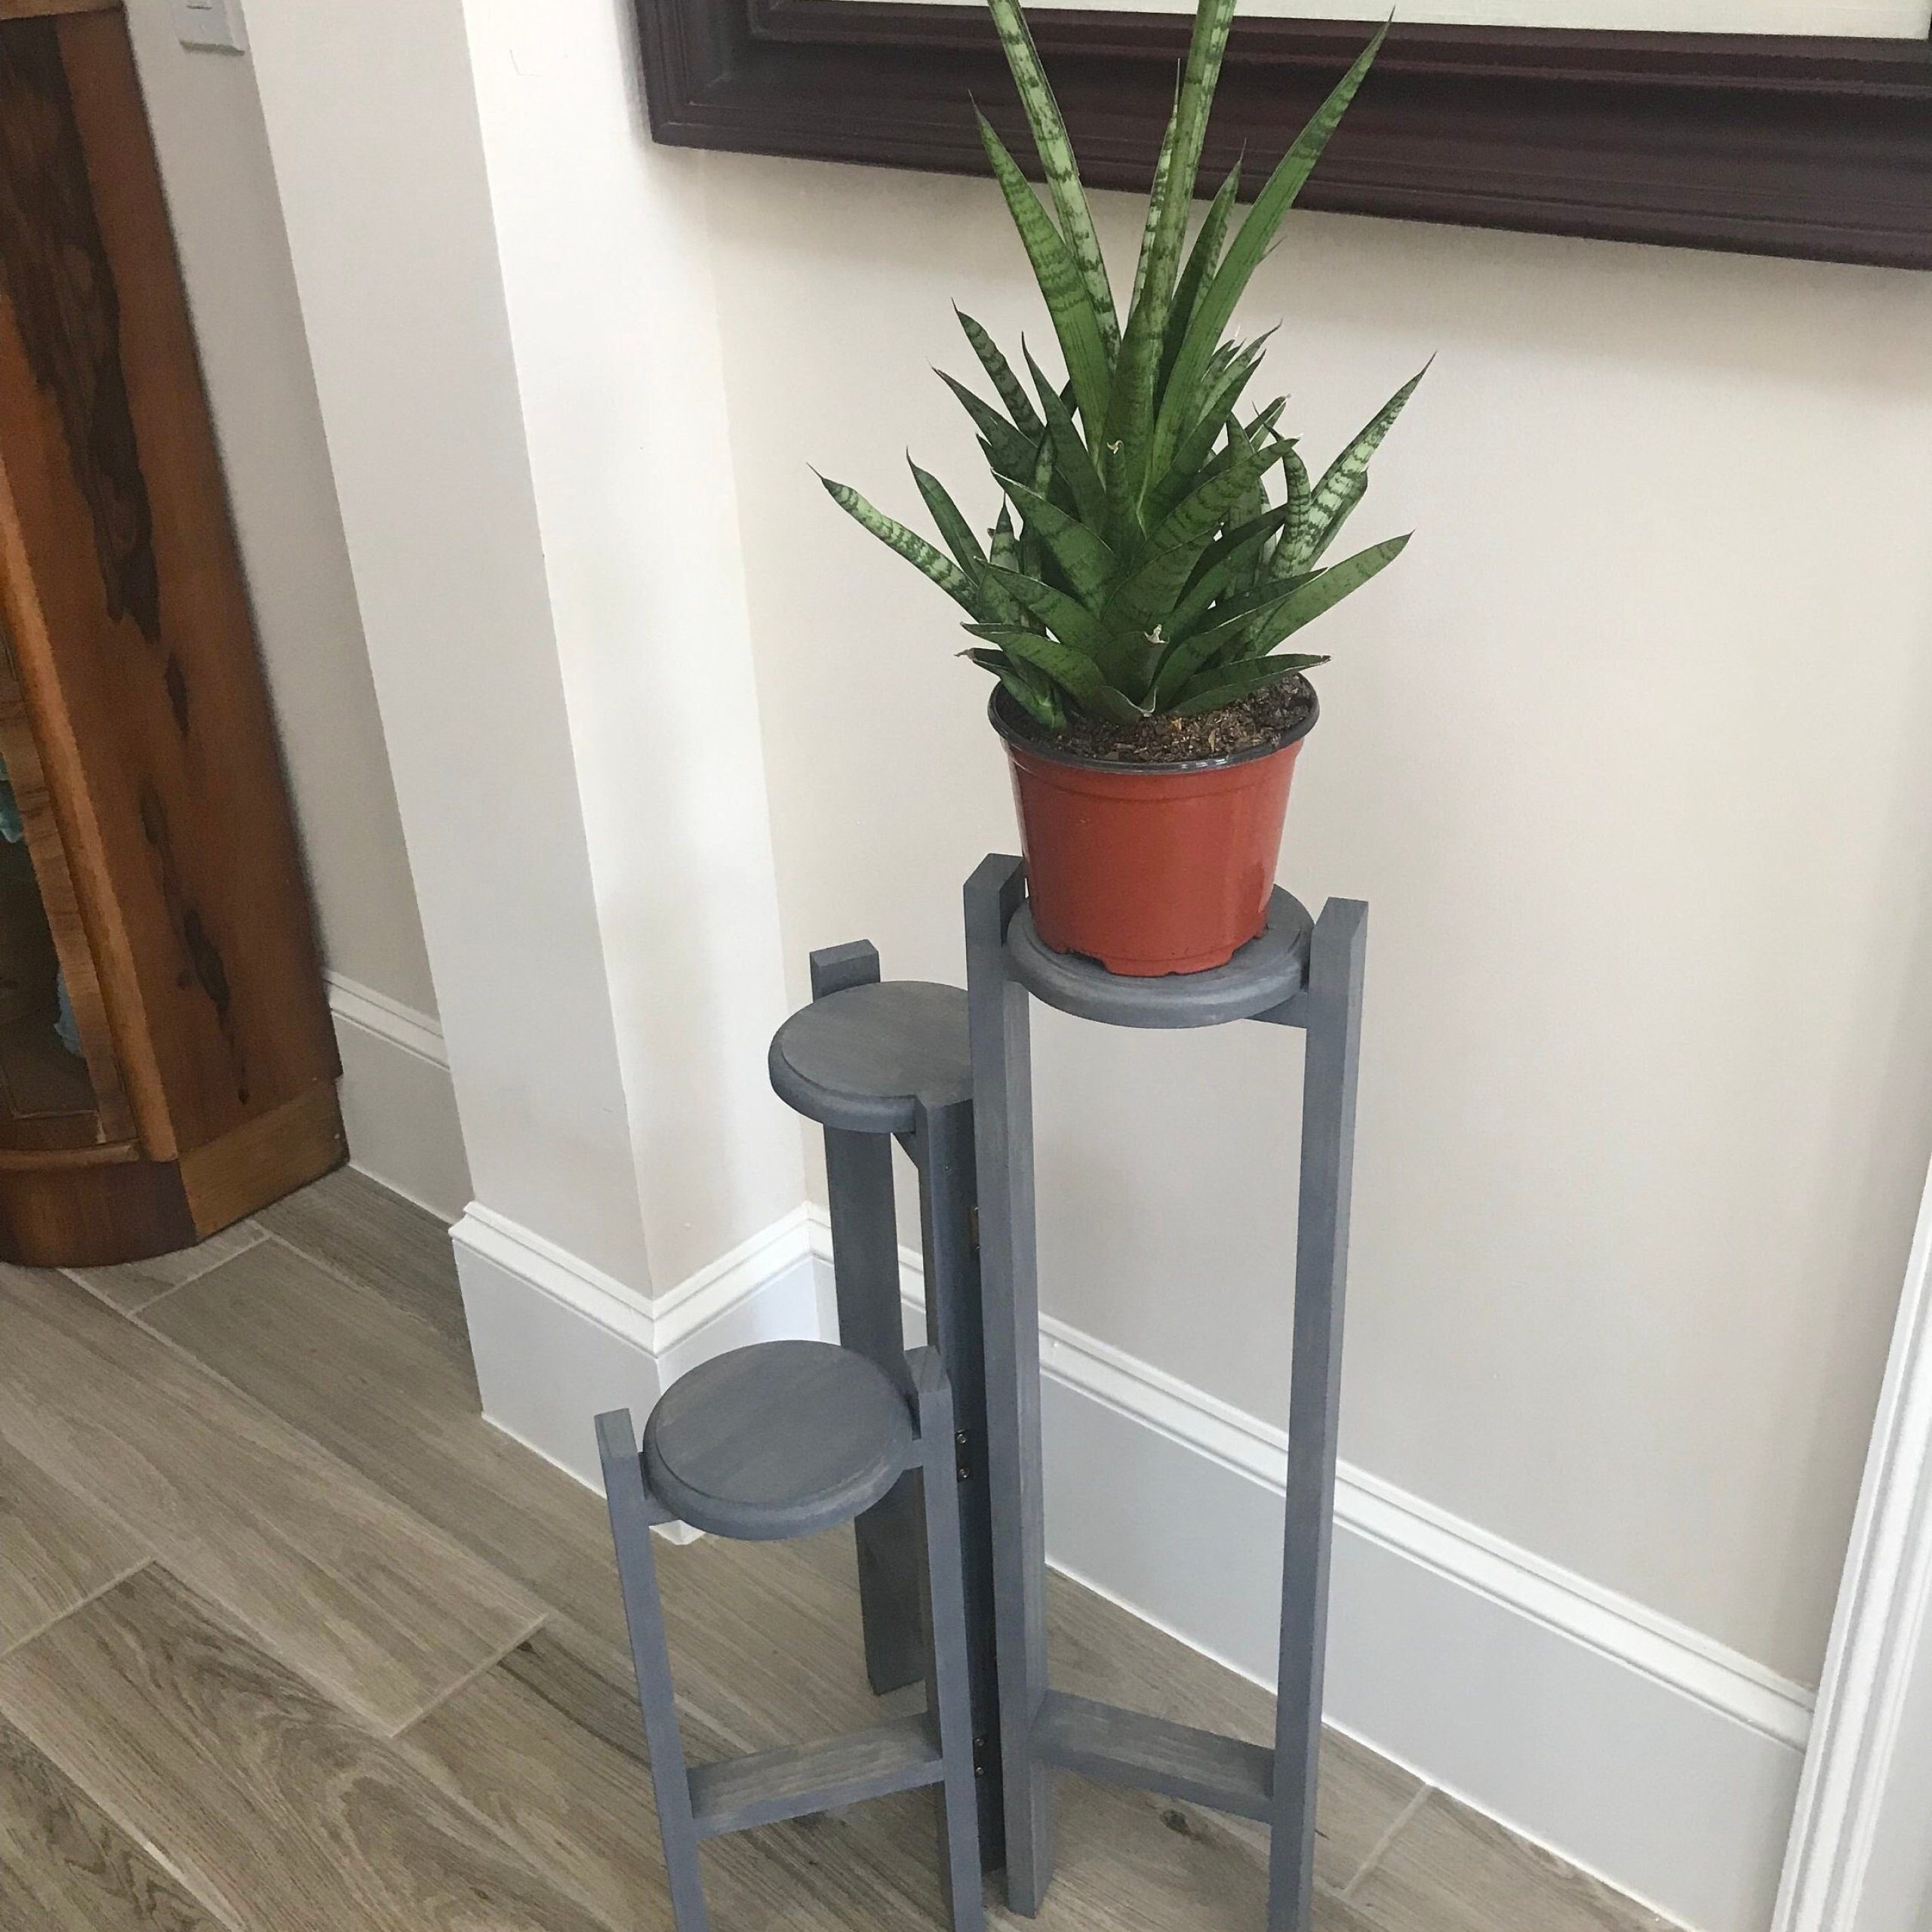 The Trio 3 Tier Plant Stand Minimalistic Modern – Etsy Intended For Weathered Gray Plant Stands (View 15 of 15)